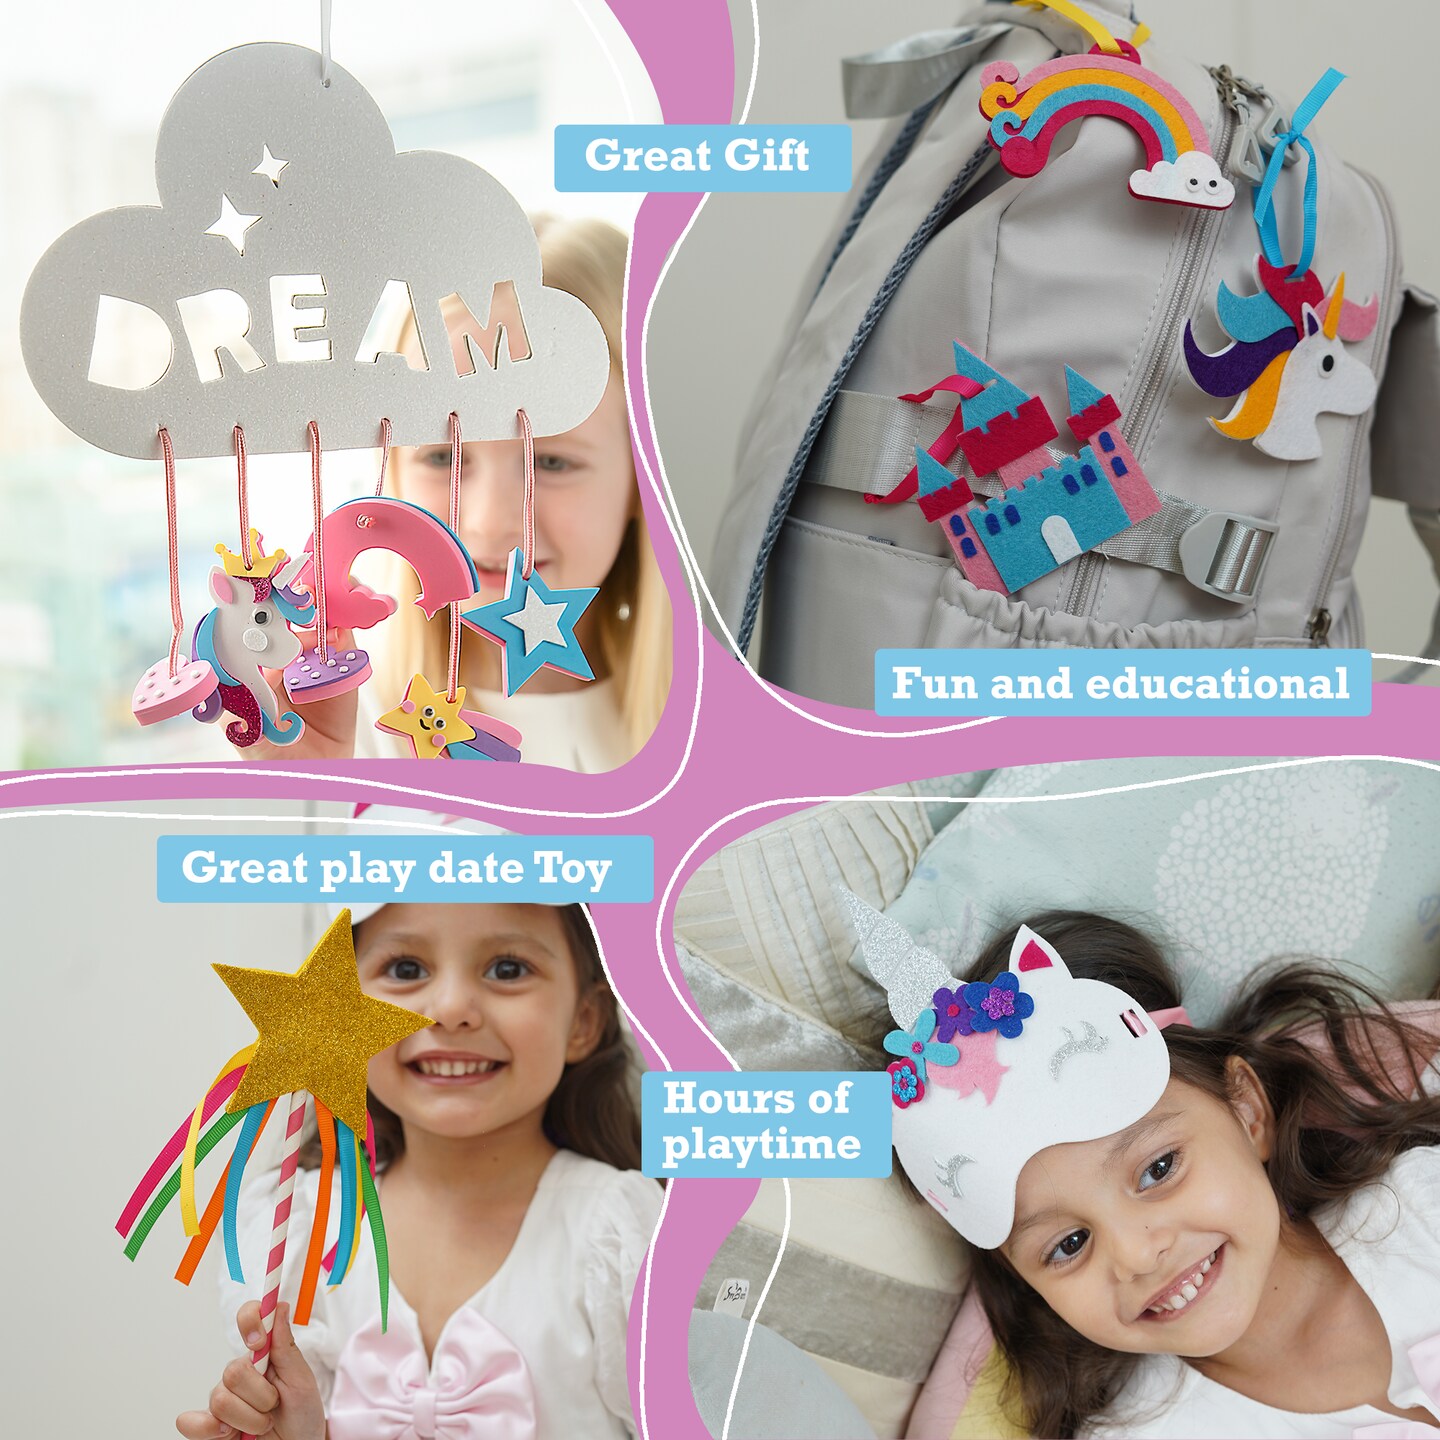  Arts Crafts For Girls, Christmas Gifts For Kids, Kids Craft  Kit, Unicorn Toys, Mermaid Toys, Unicorn Gifts For Girls Age 6-8, Arts &  Crafts For Kids 4-6, Kids Crafts Ages